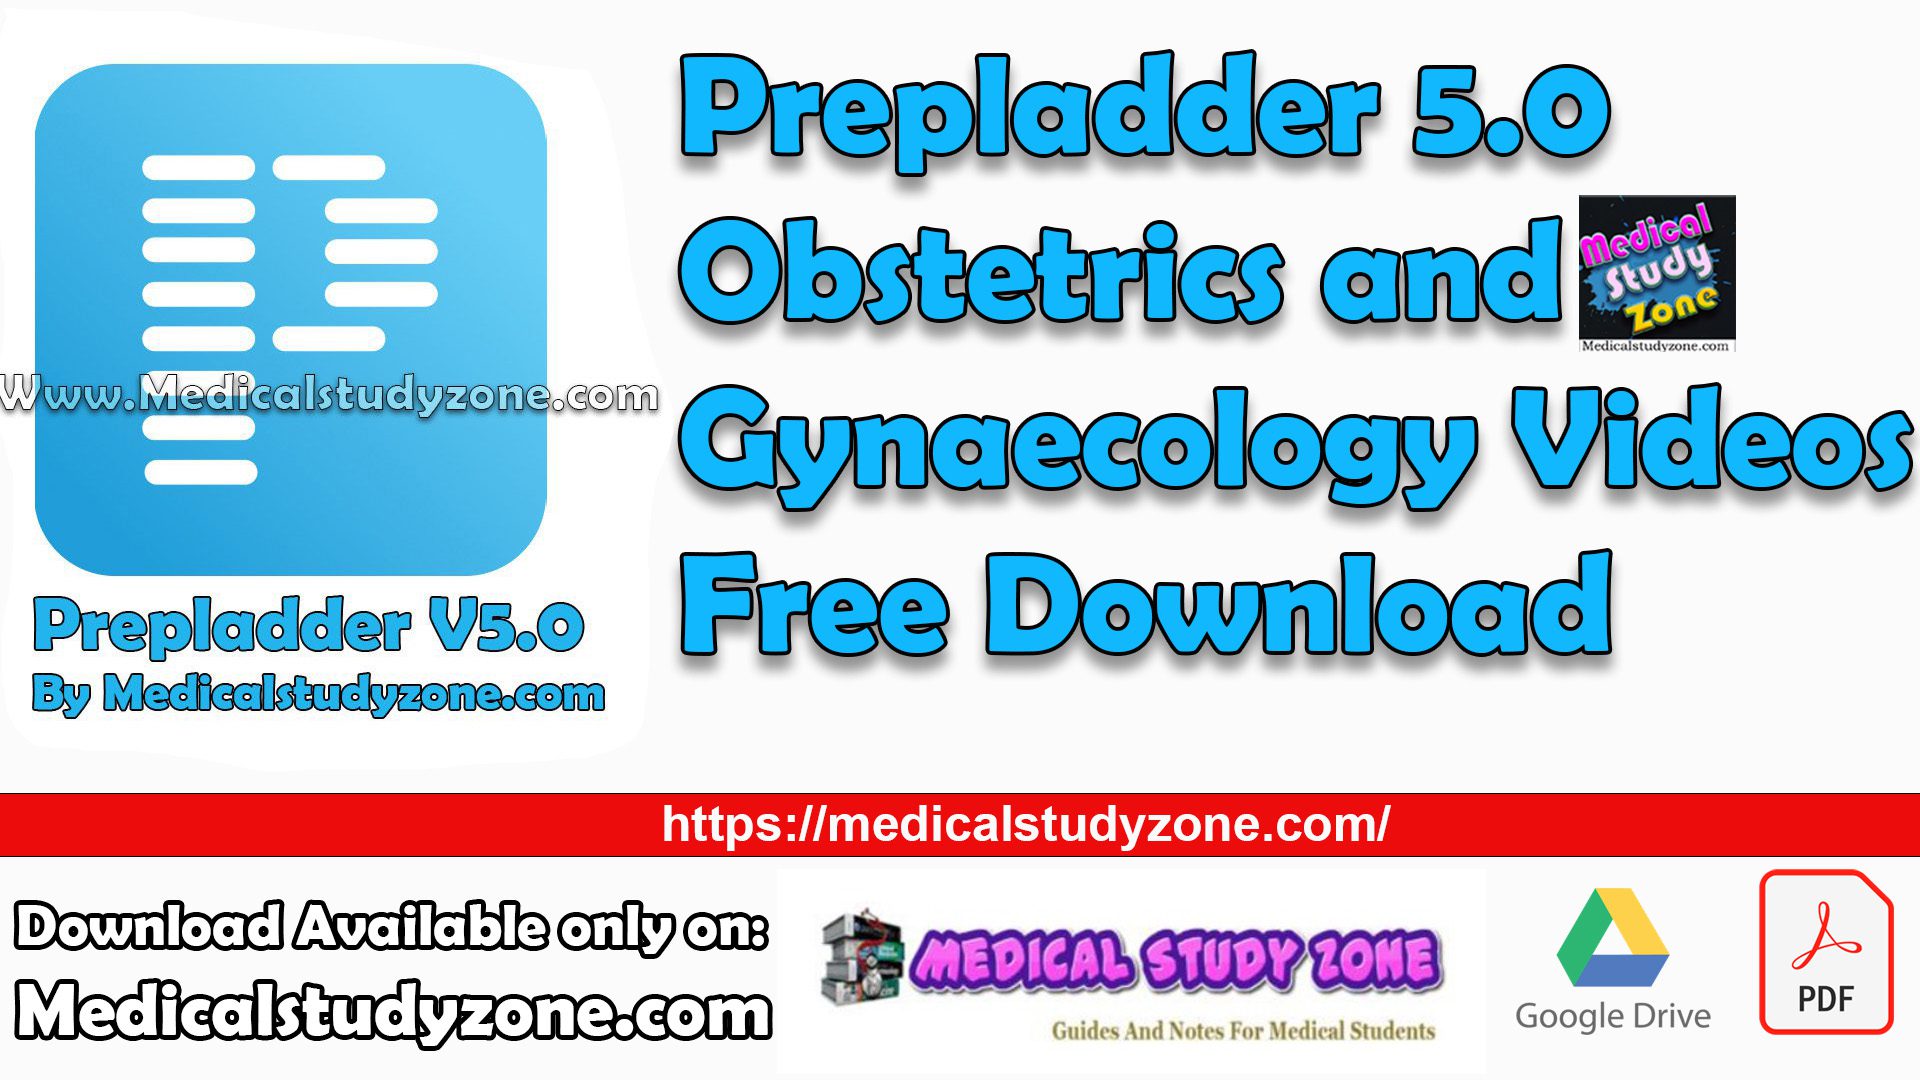 Prepladder 5.0 Obstetrics and Gynaecology Videos Free Download